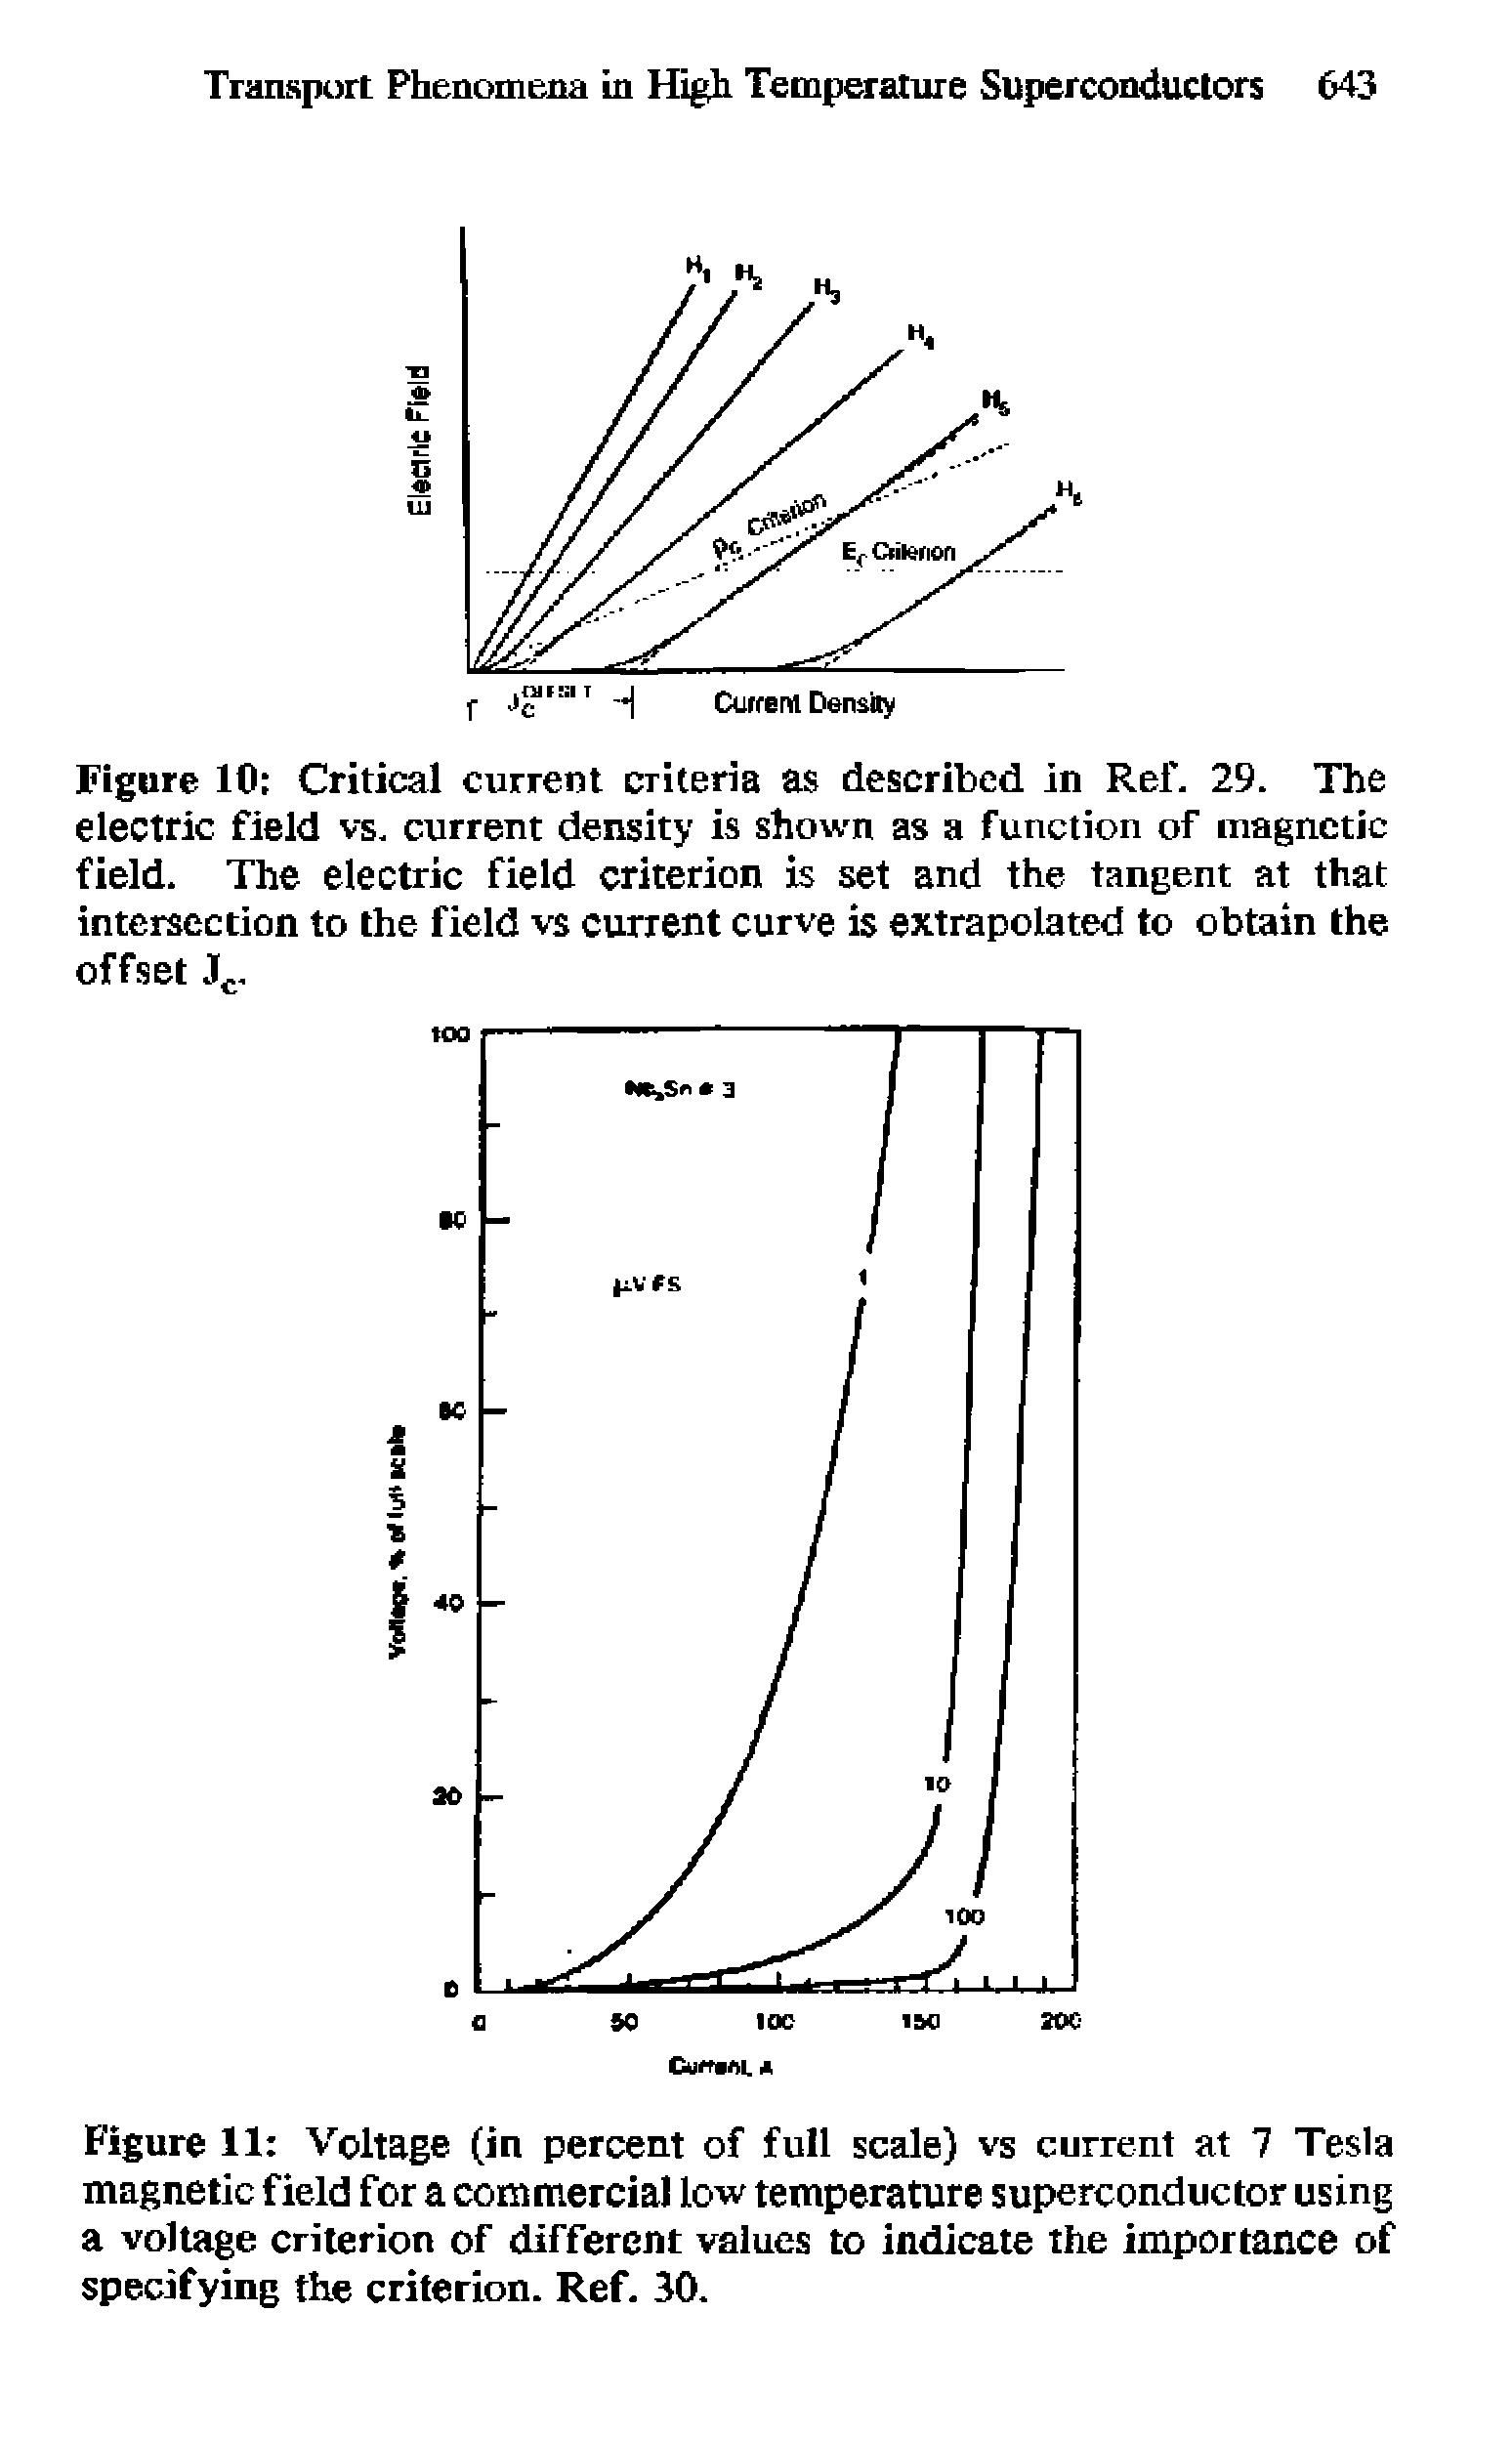 Figure 10 Critical current criteria as described in Ref. 29. The electric field vs. current density is shown as a function of magnetic field. The electric field criterion is set and the tangent at that intersection to the field vs current curve is extrapolated to obtain the offset Jc.